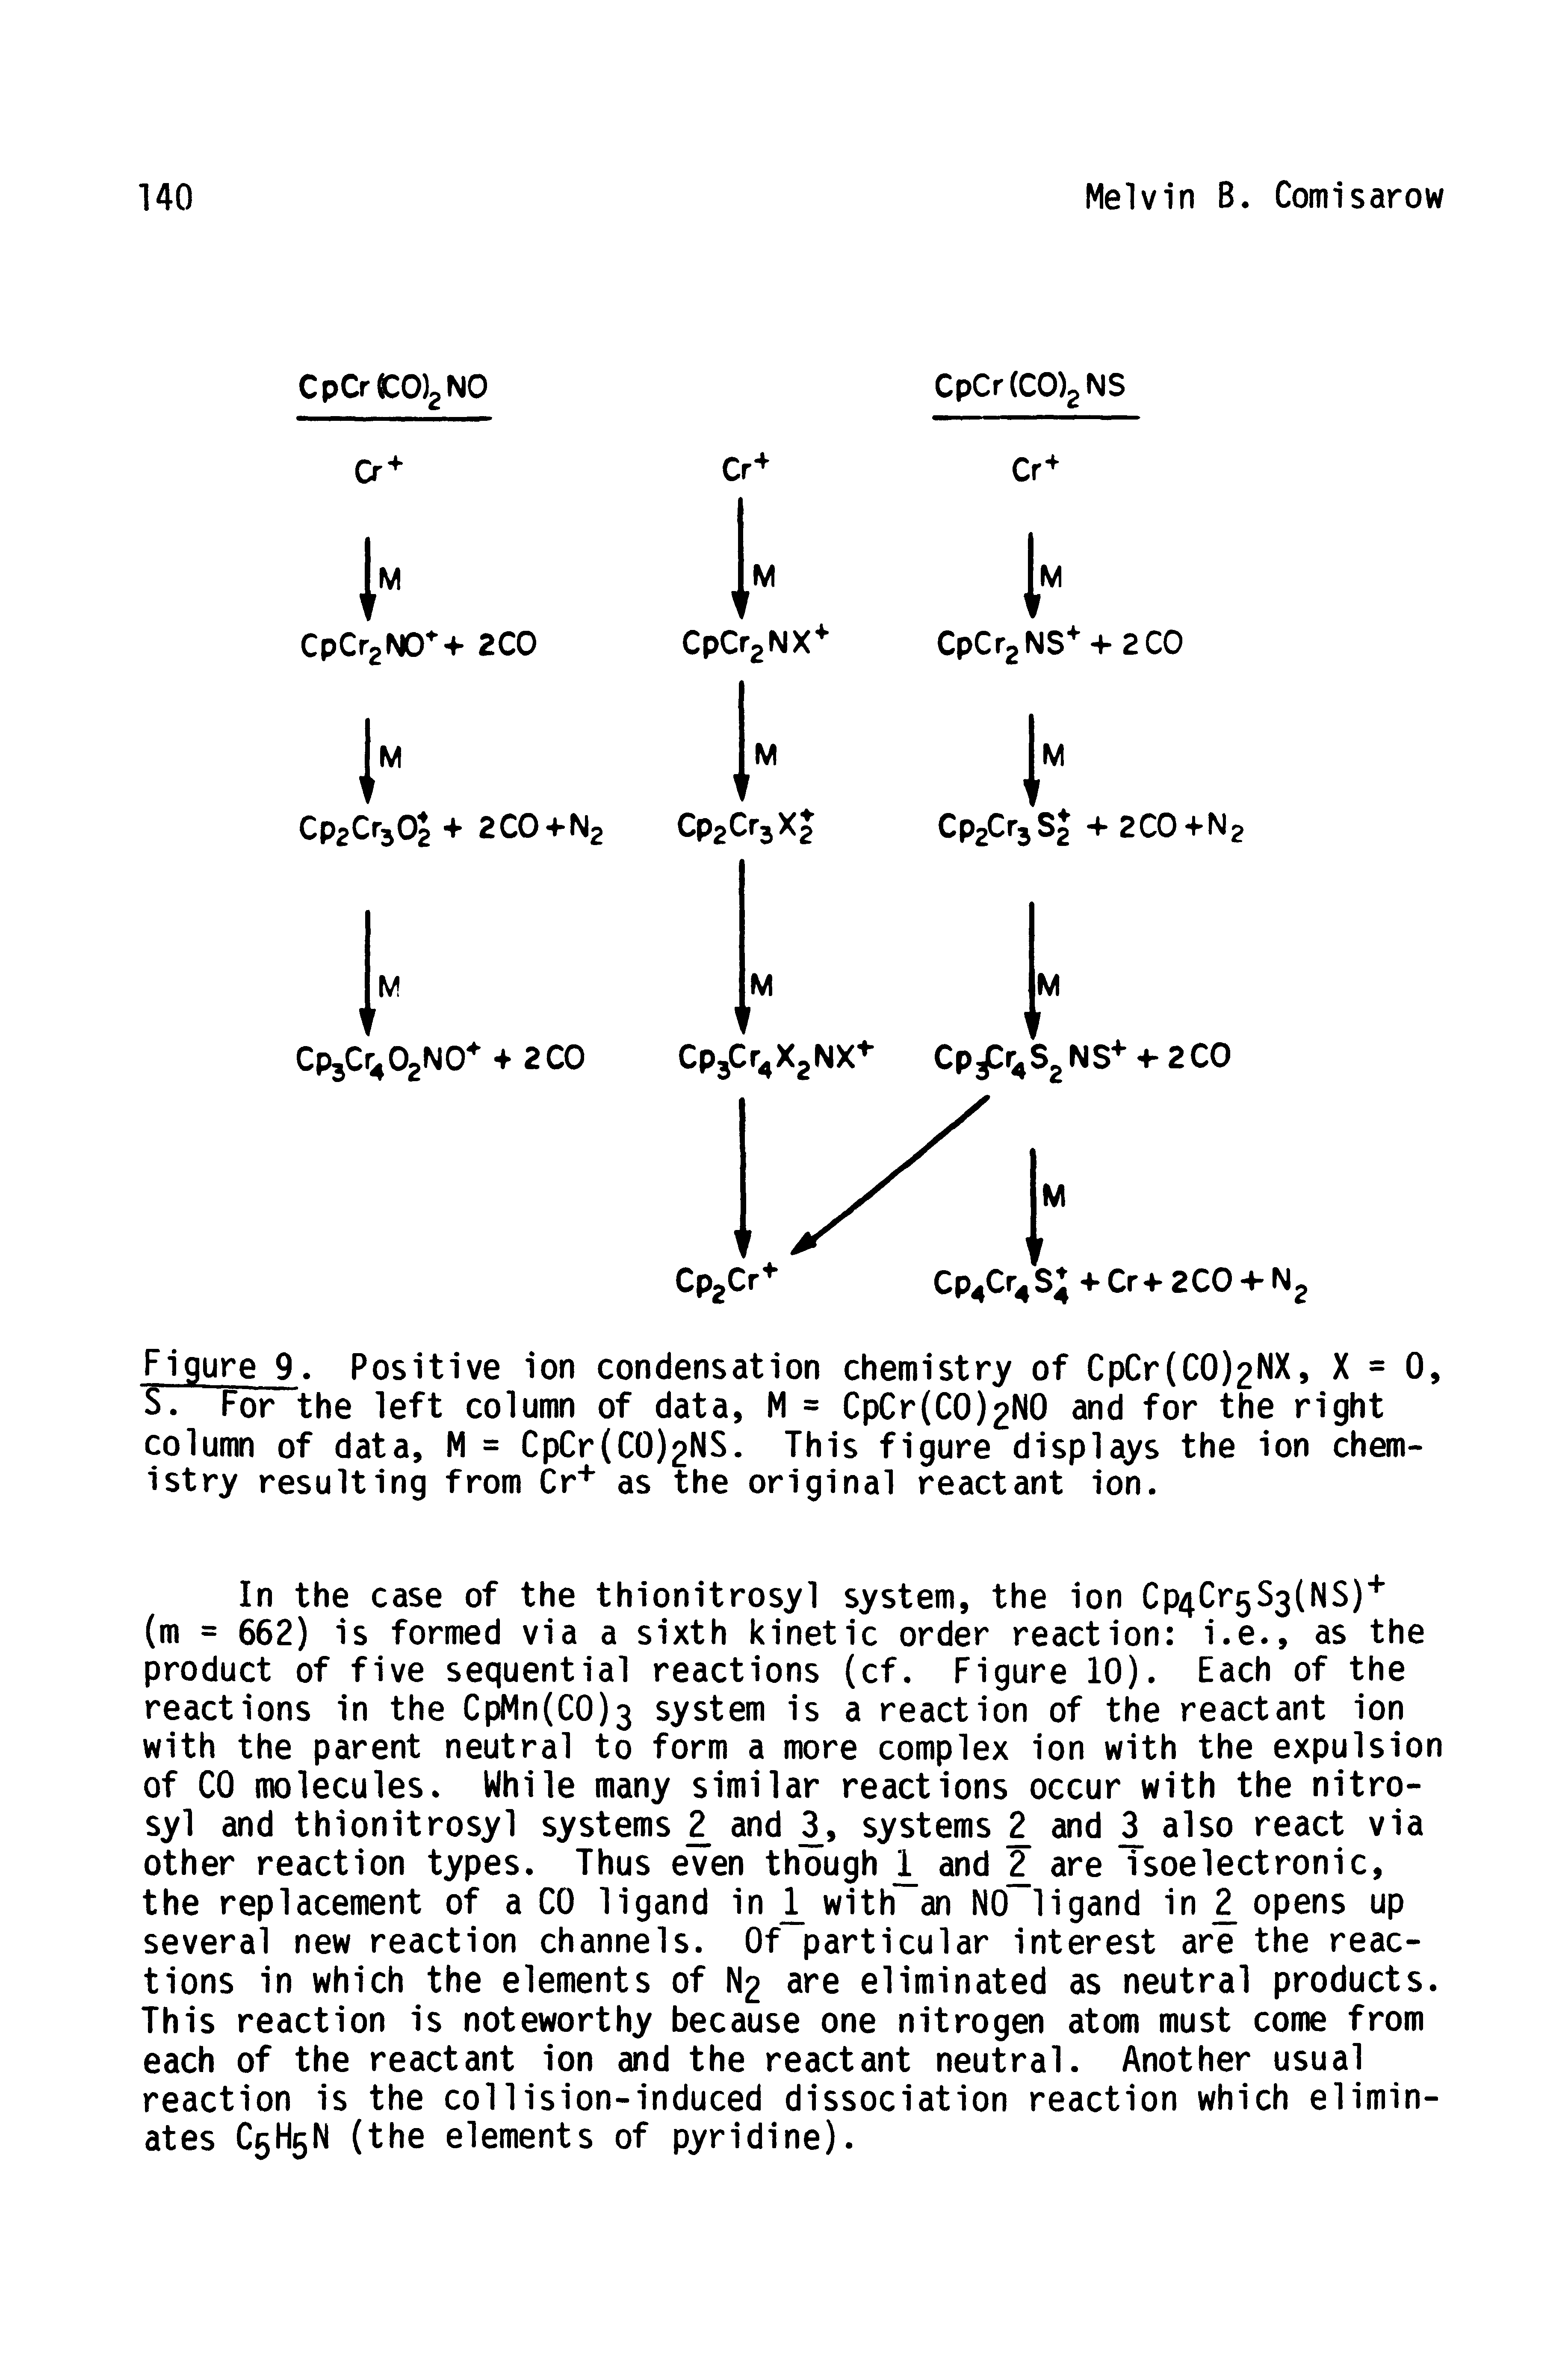 Figure 9. Positive ion condensation chemistry of CpCr(C0)2NX, X = 0, S. For the left column of data, M = CpCr(C0)2N0 and for the right column of data, M = CpCr(C0)2NS. This figure displays the ion chemistry resulting from Cr as the original reactant ion.